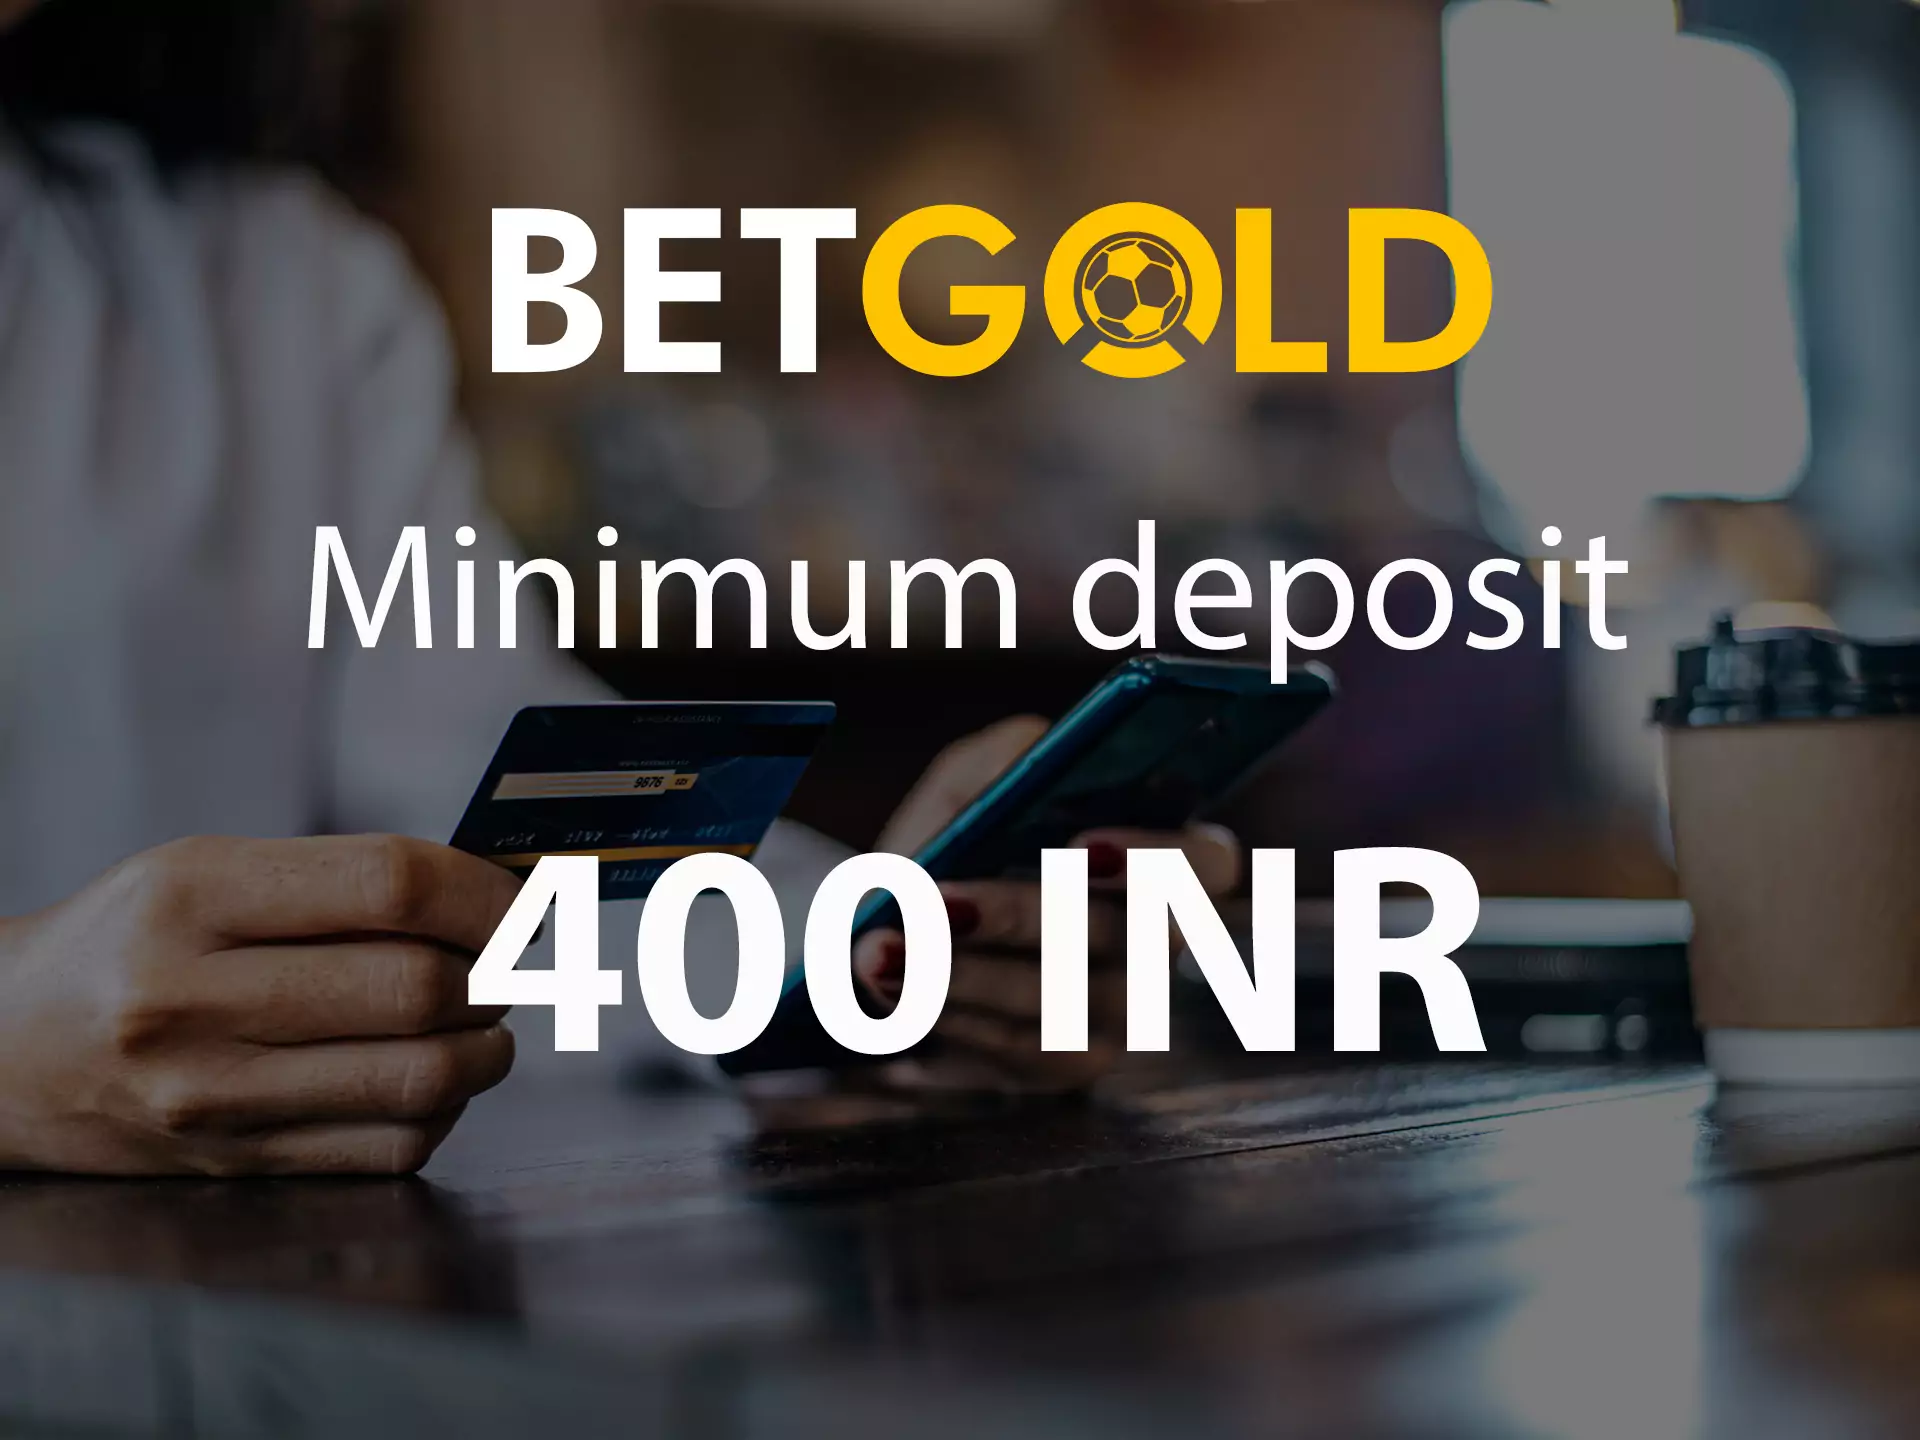 Your minimum deposit at Betgold should be no less than 400 INR.